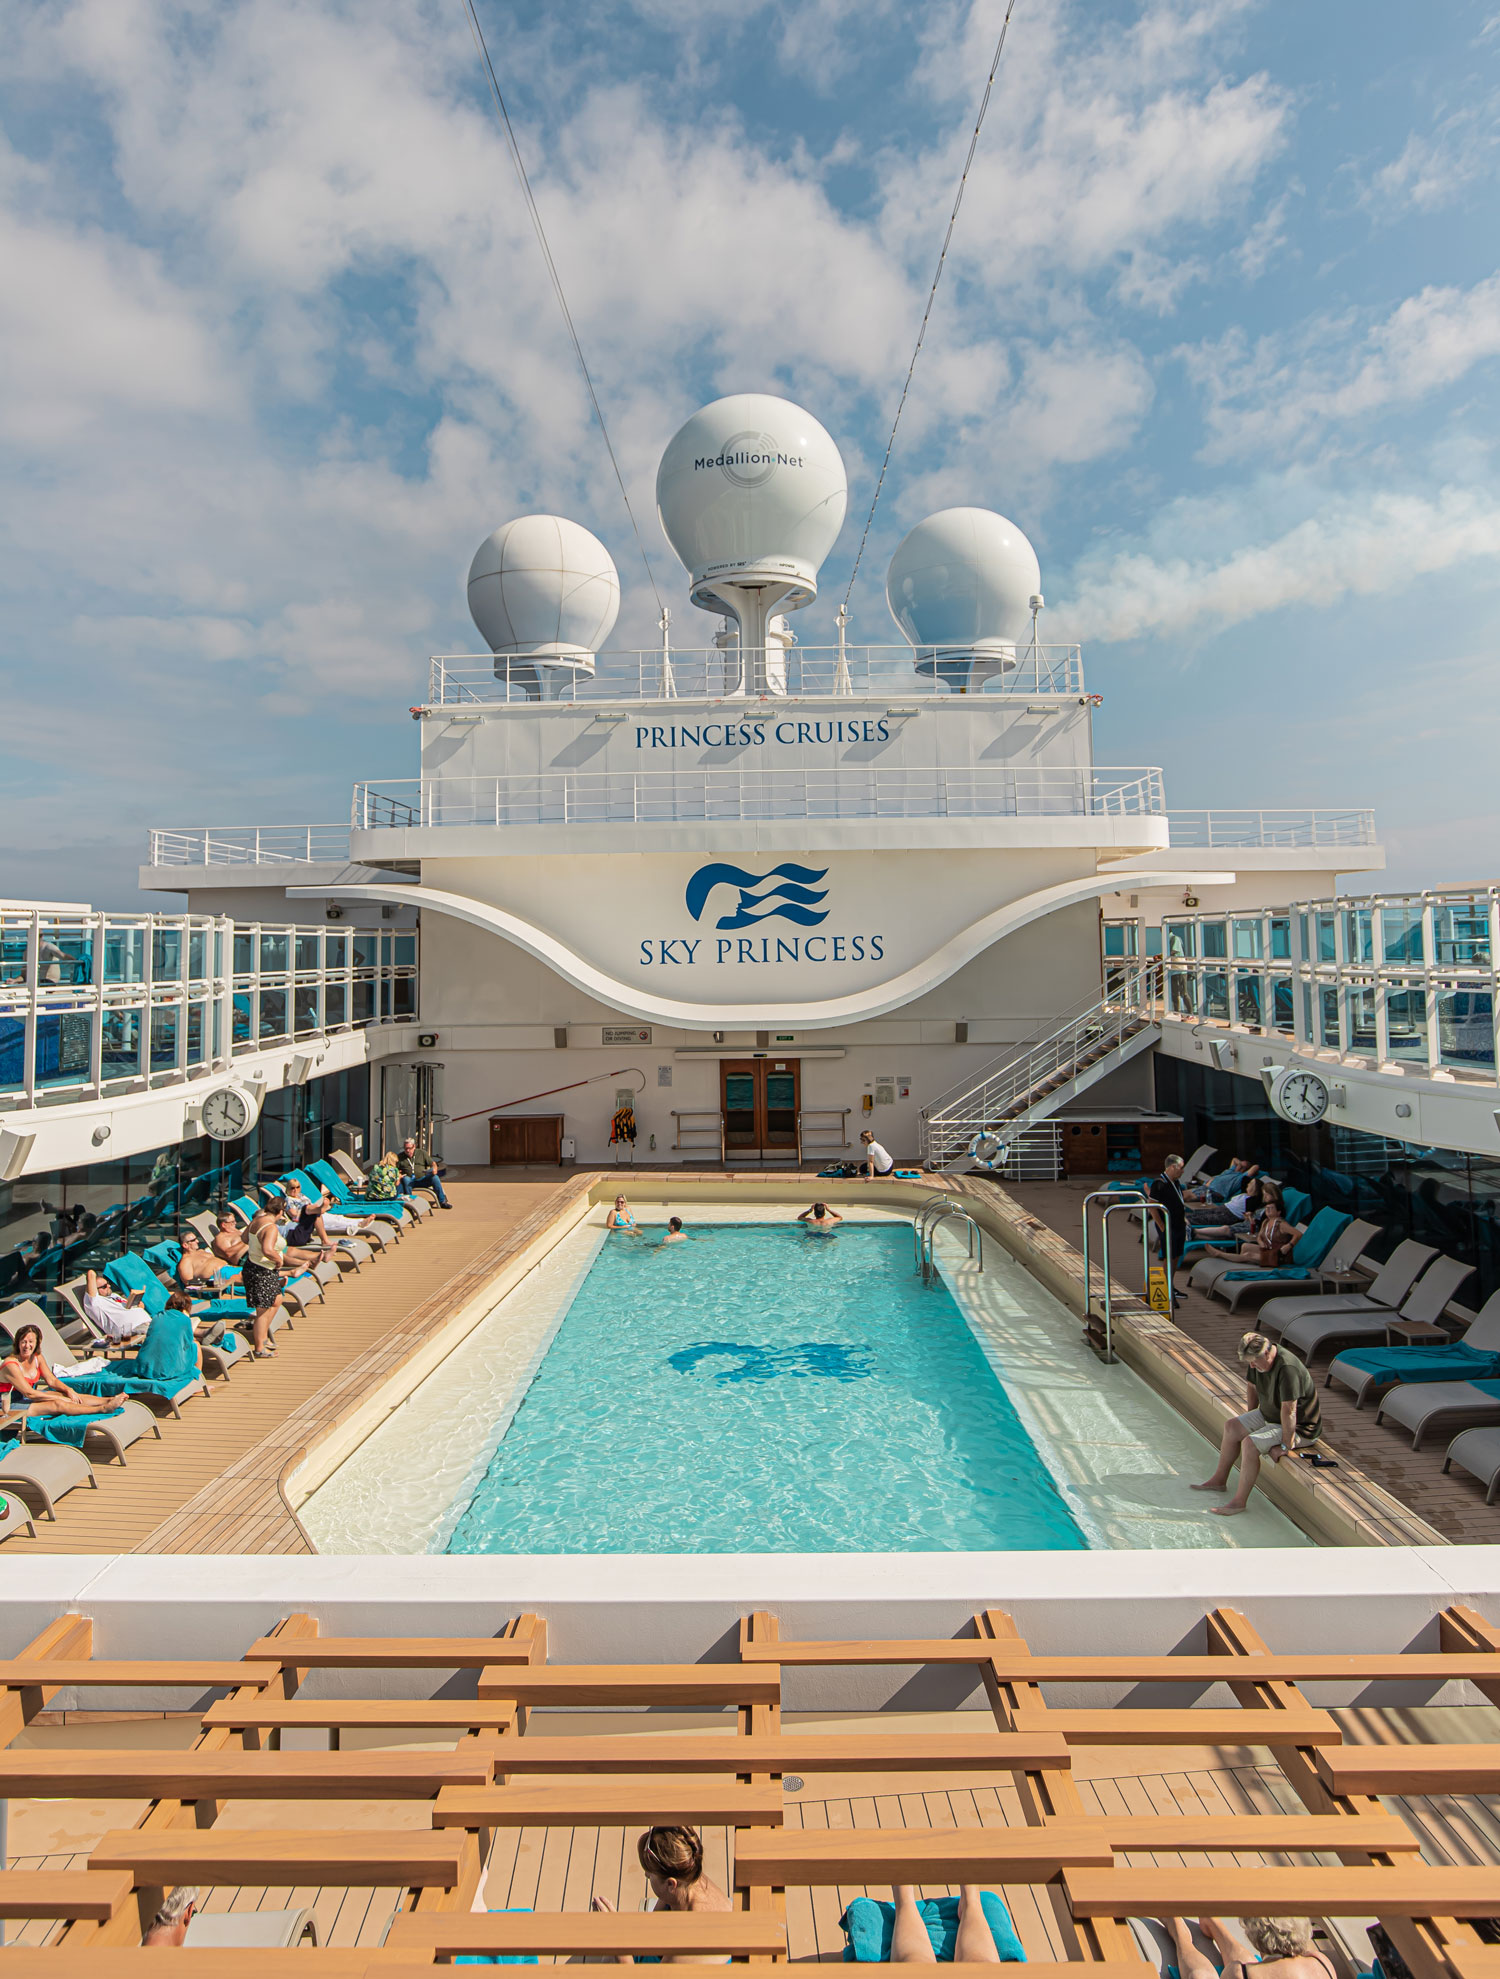 Sky Princess Review: The Ultimate Guide to Cruising with Princess Cruises